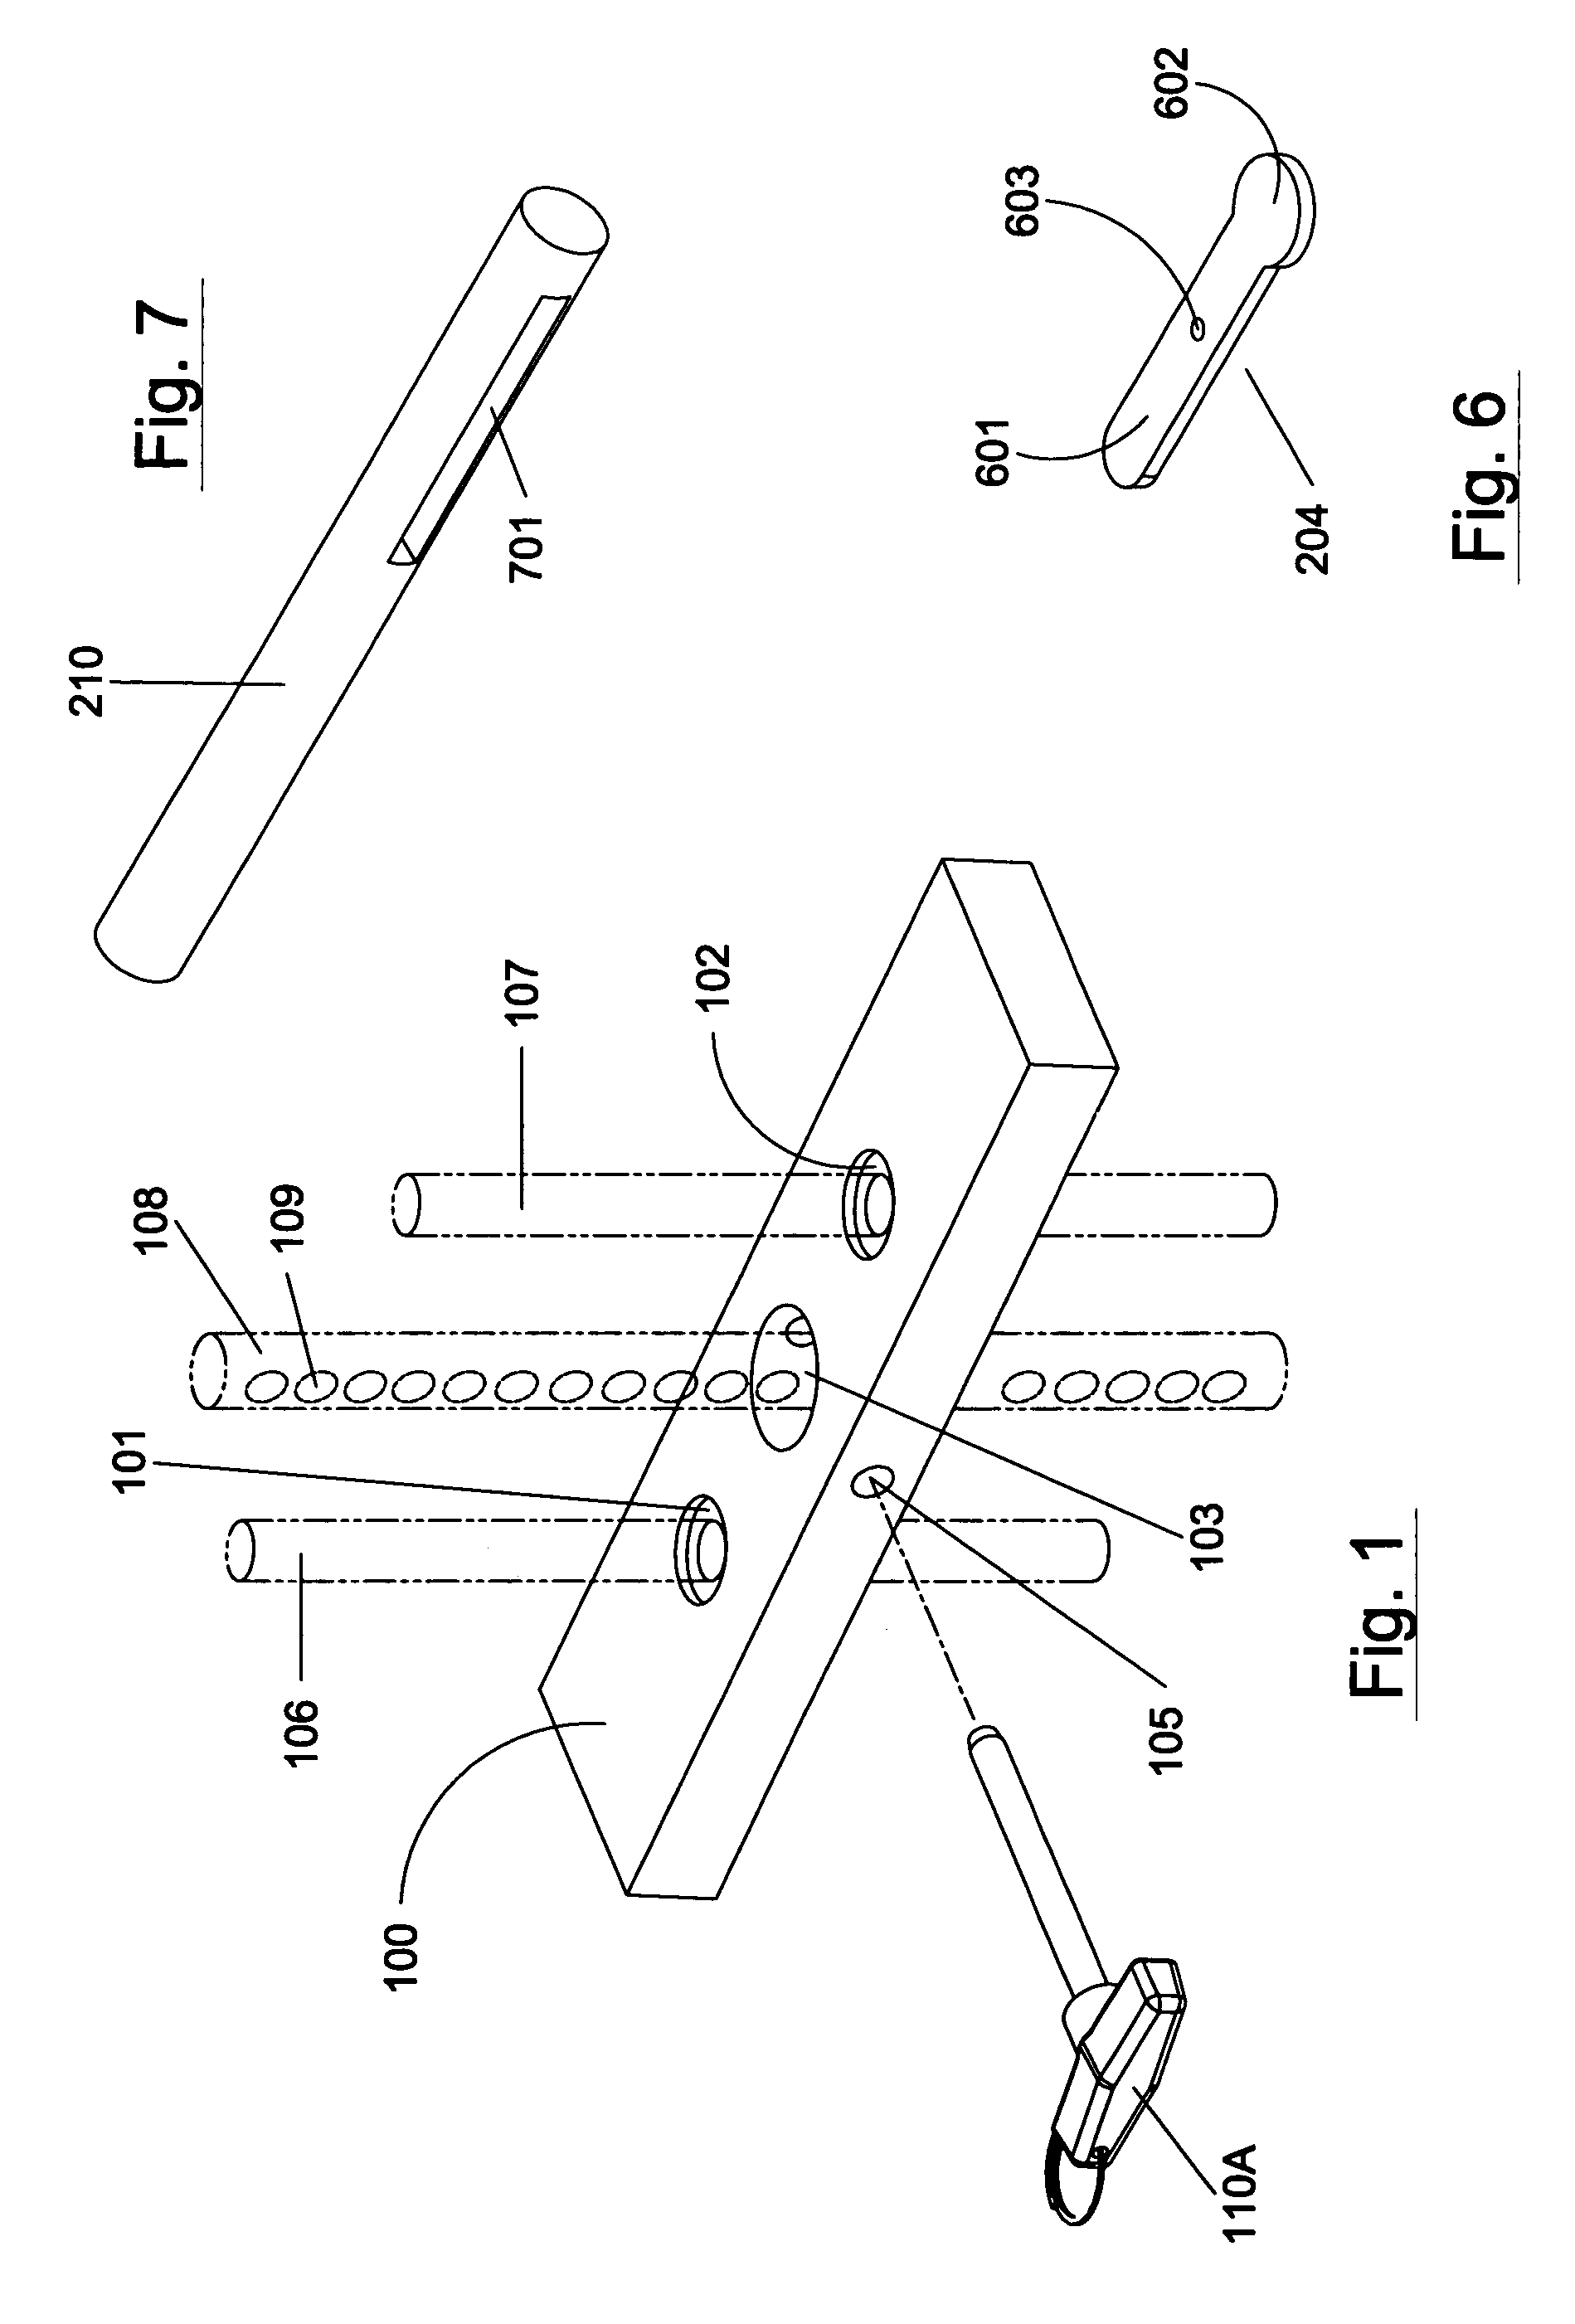 Weight plate with externally actuated internal locking device